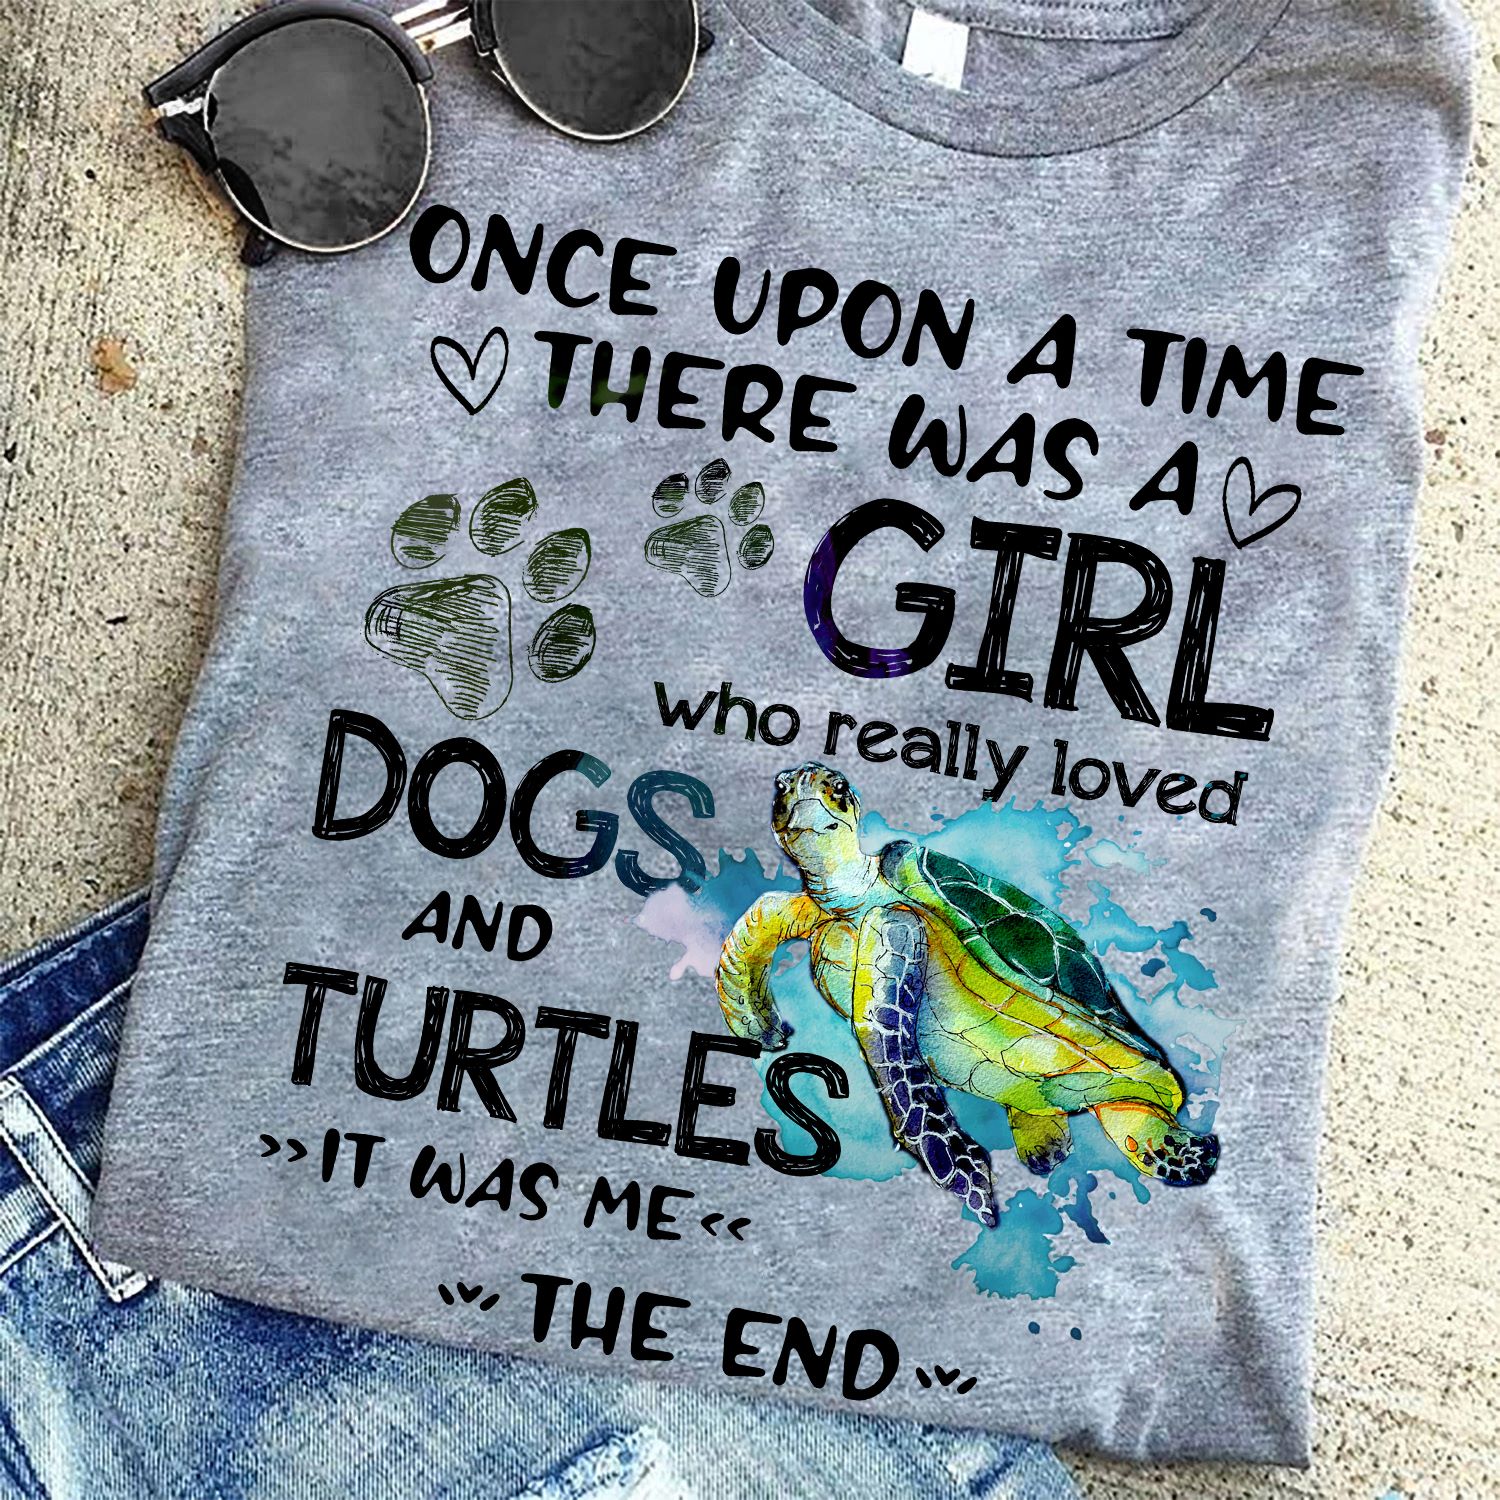 Once upon a time there was a girl who really loved dogs and turtle